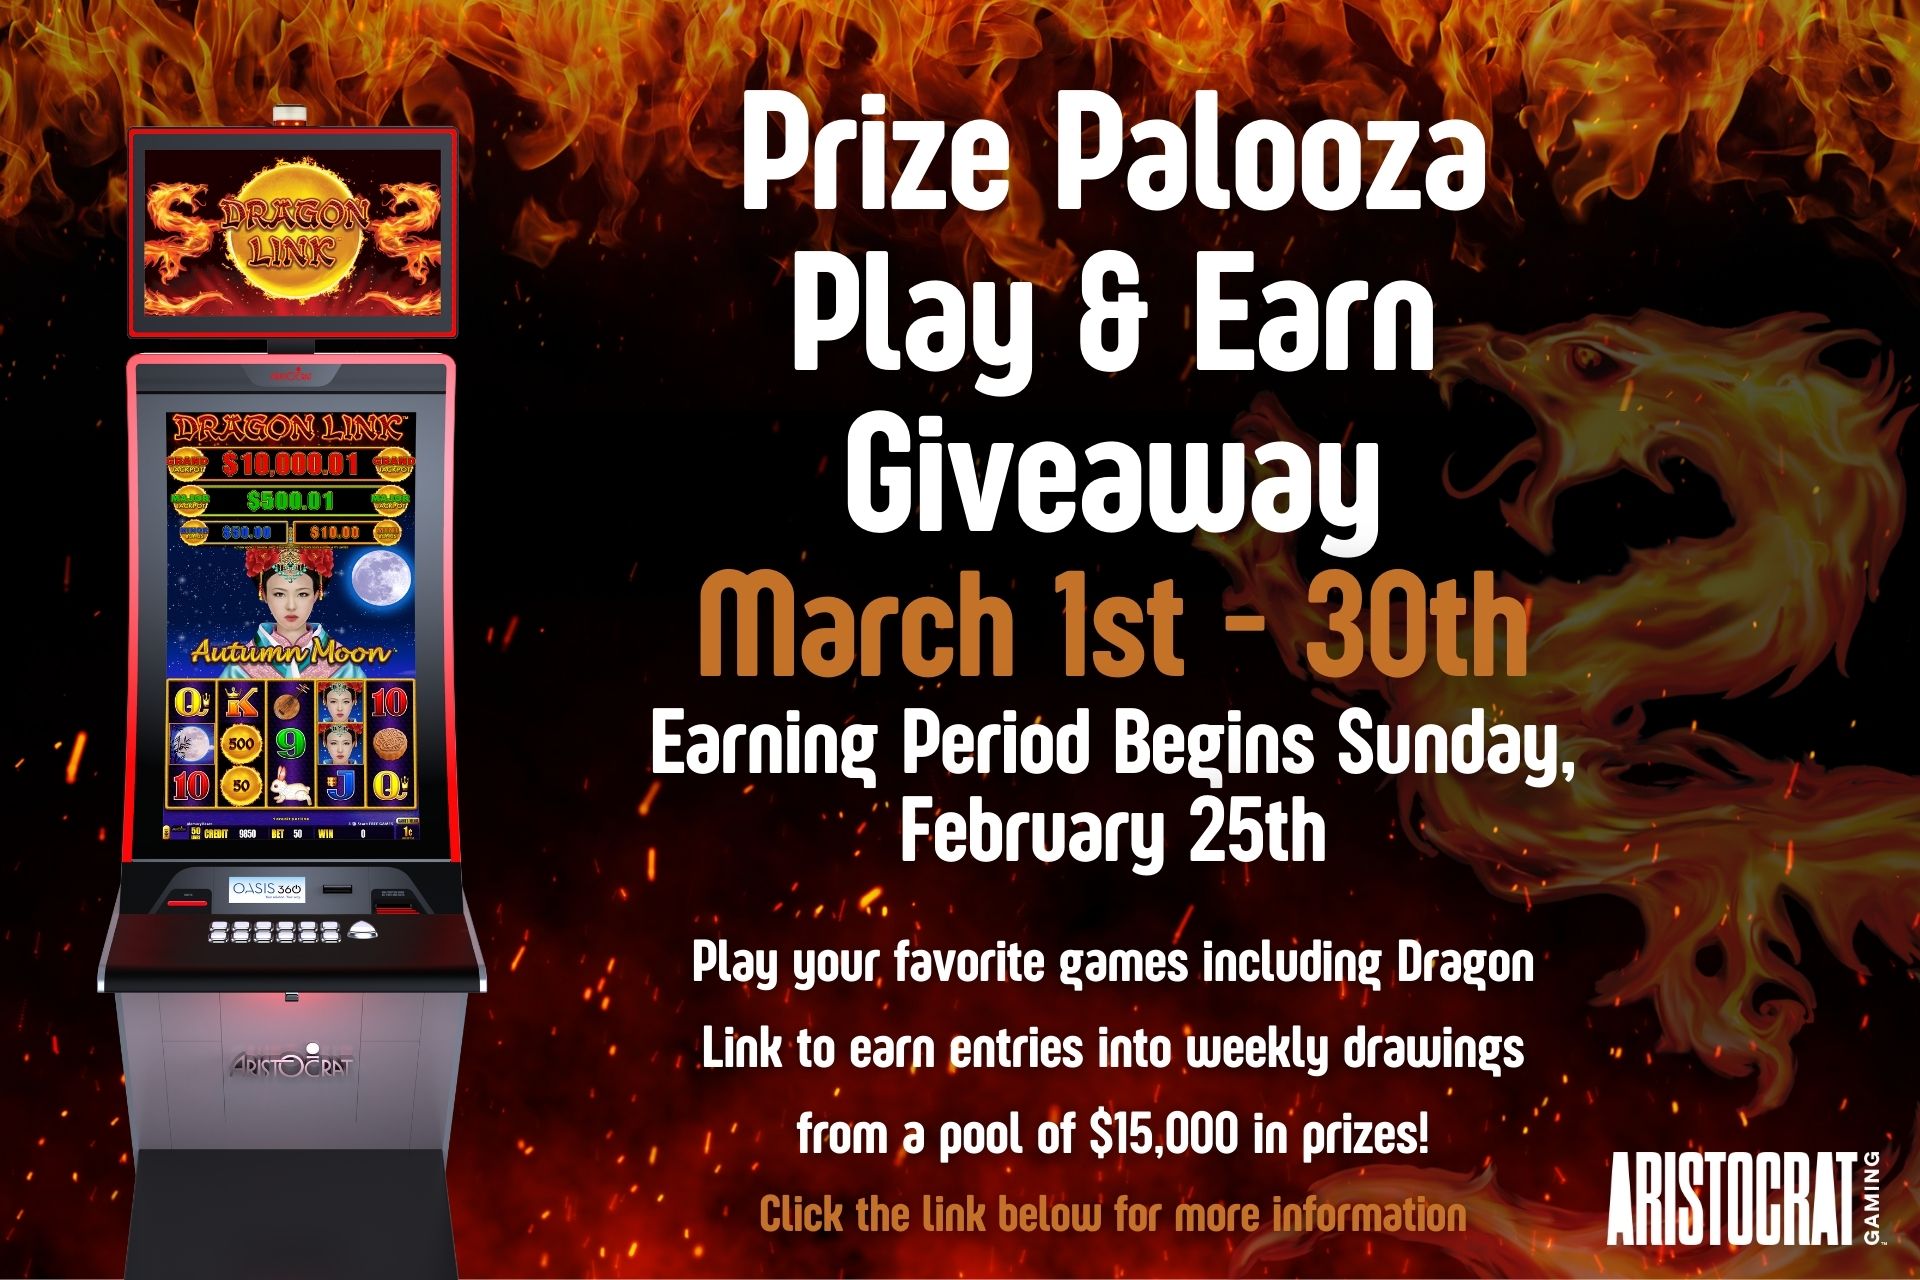 Prize Palooza Play and Earn Giveaway March 1st - 30th